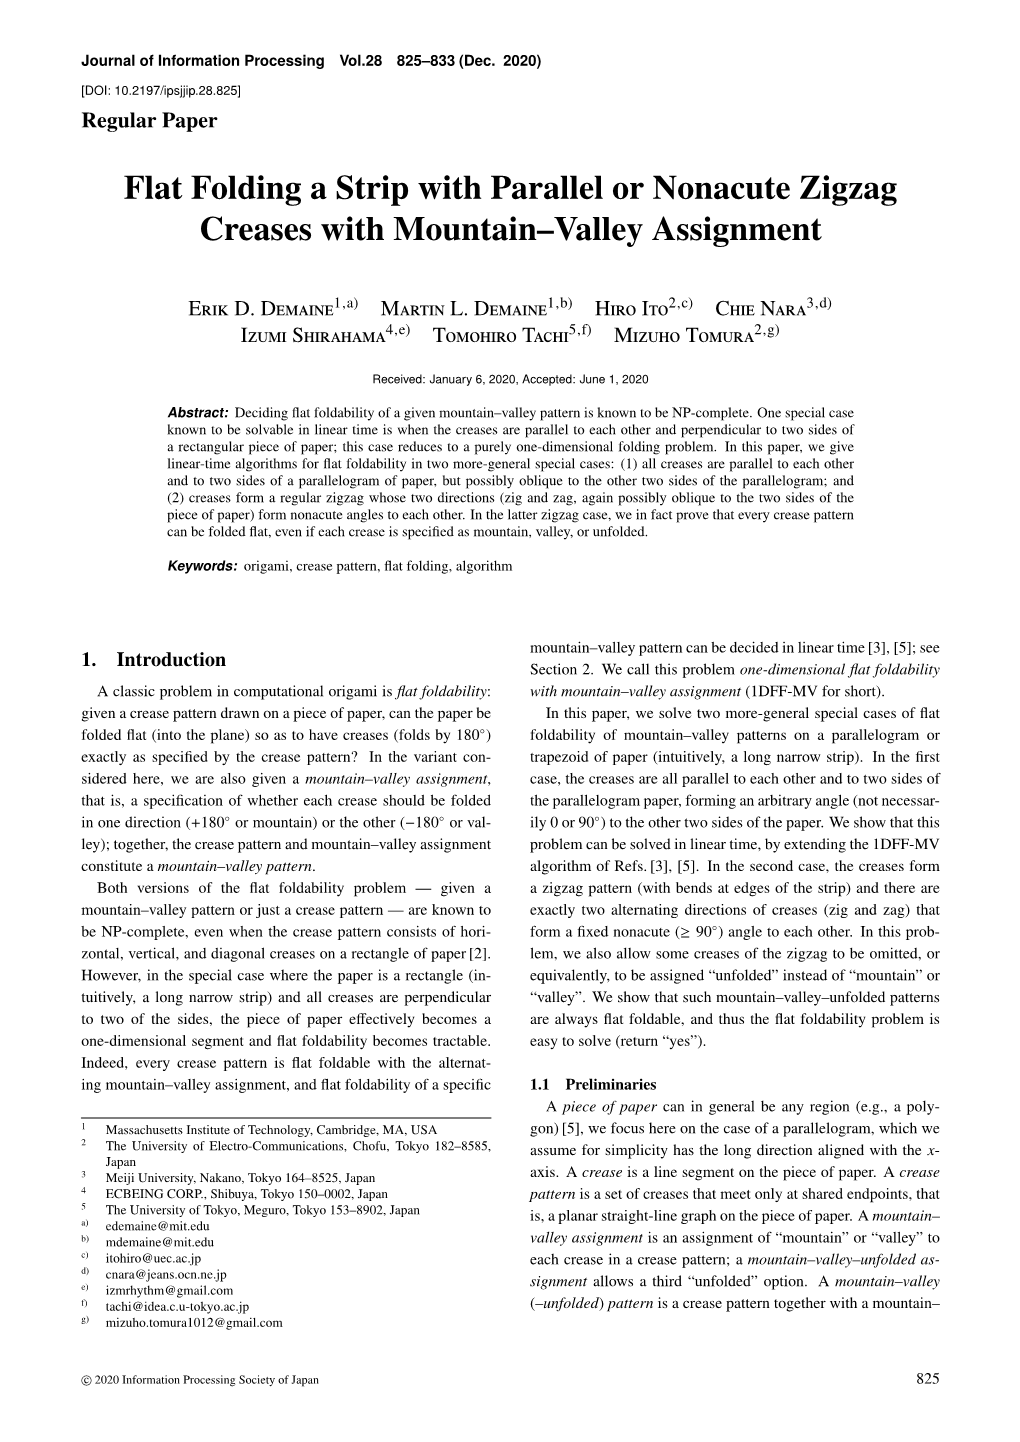 Flat Folding a Strip with Parallel Or Nonacute Zigzag Creases with Mountain–Valley Assignment